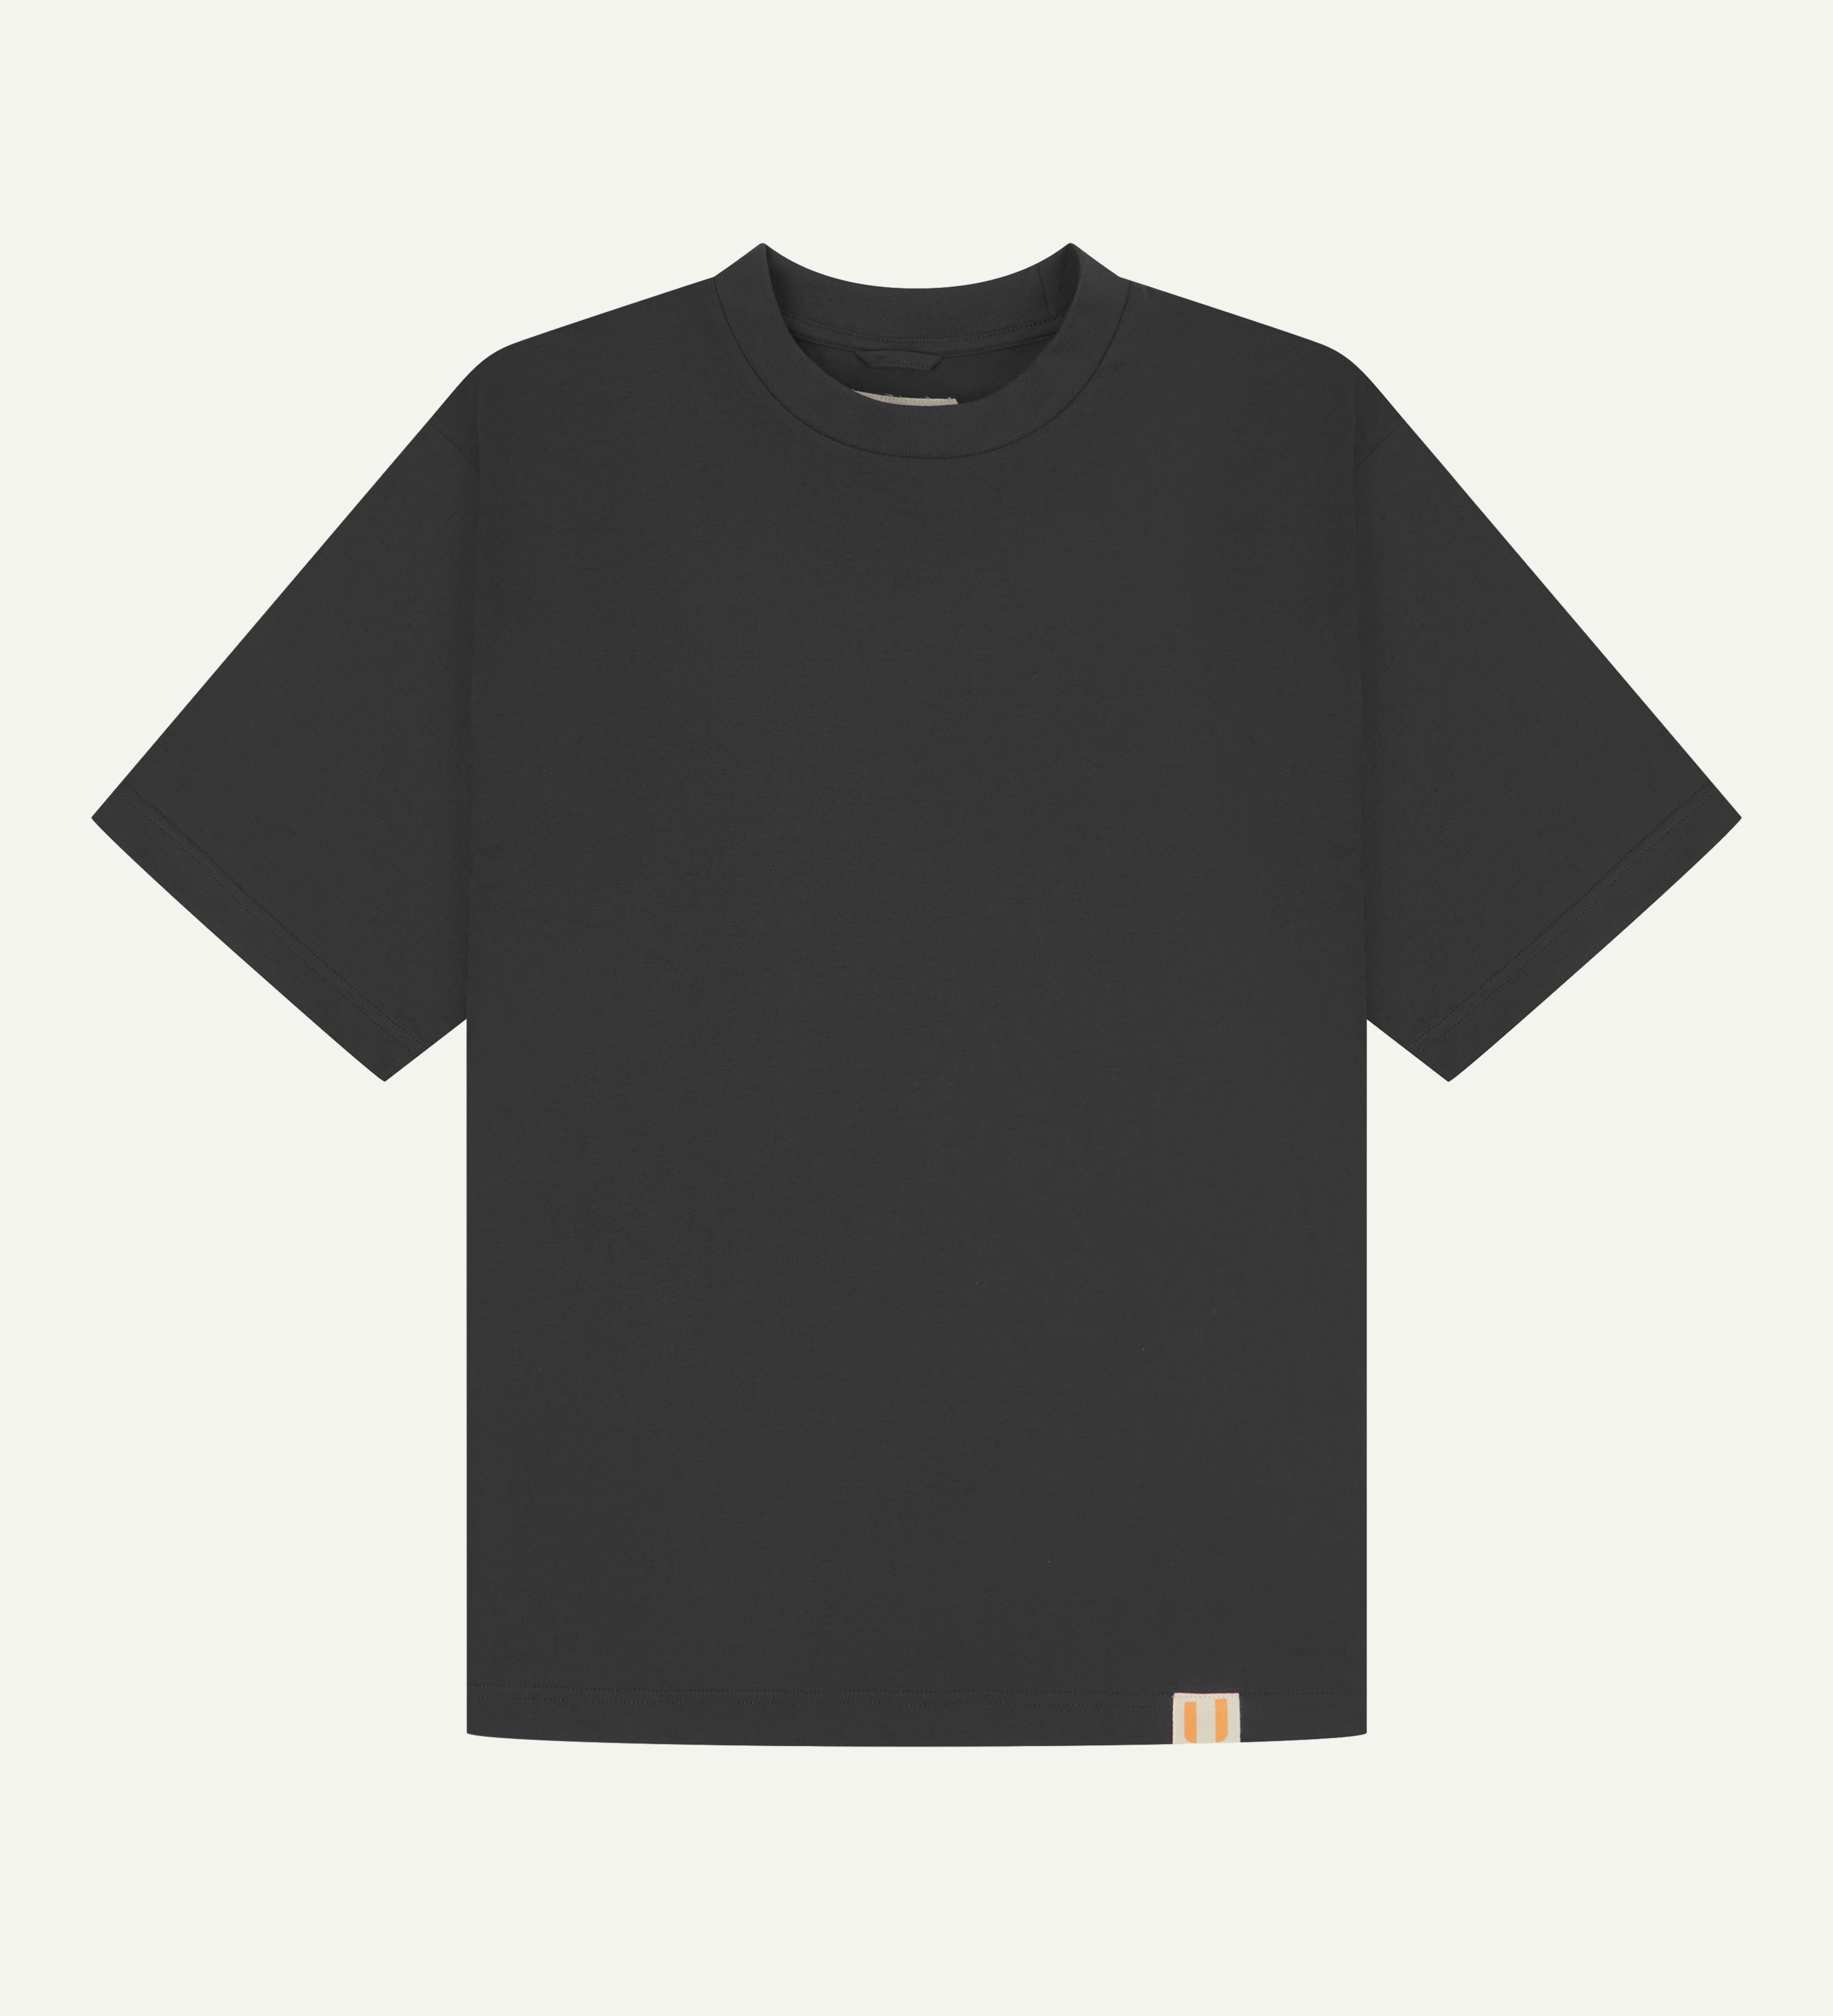 Front flat view of dark grey oversized  organic cotton T-shirt by Uskees showing the brand logo.